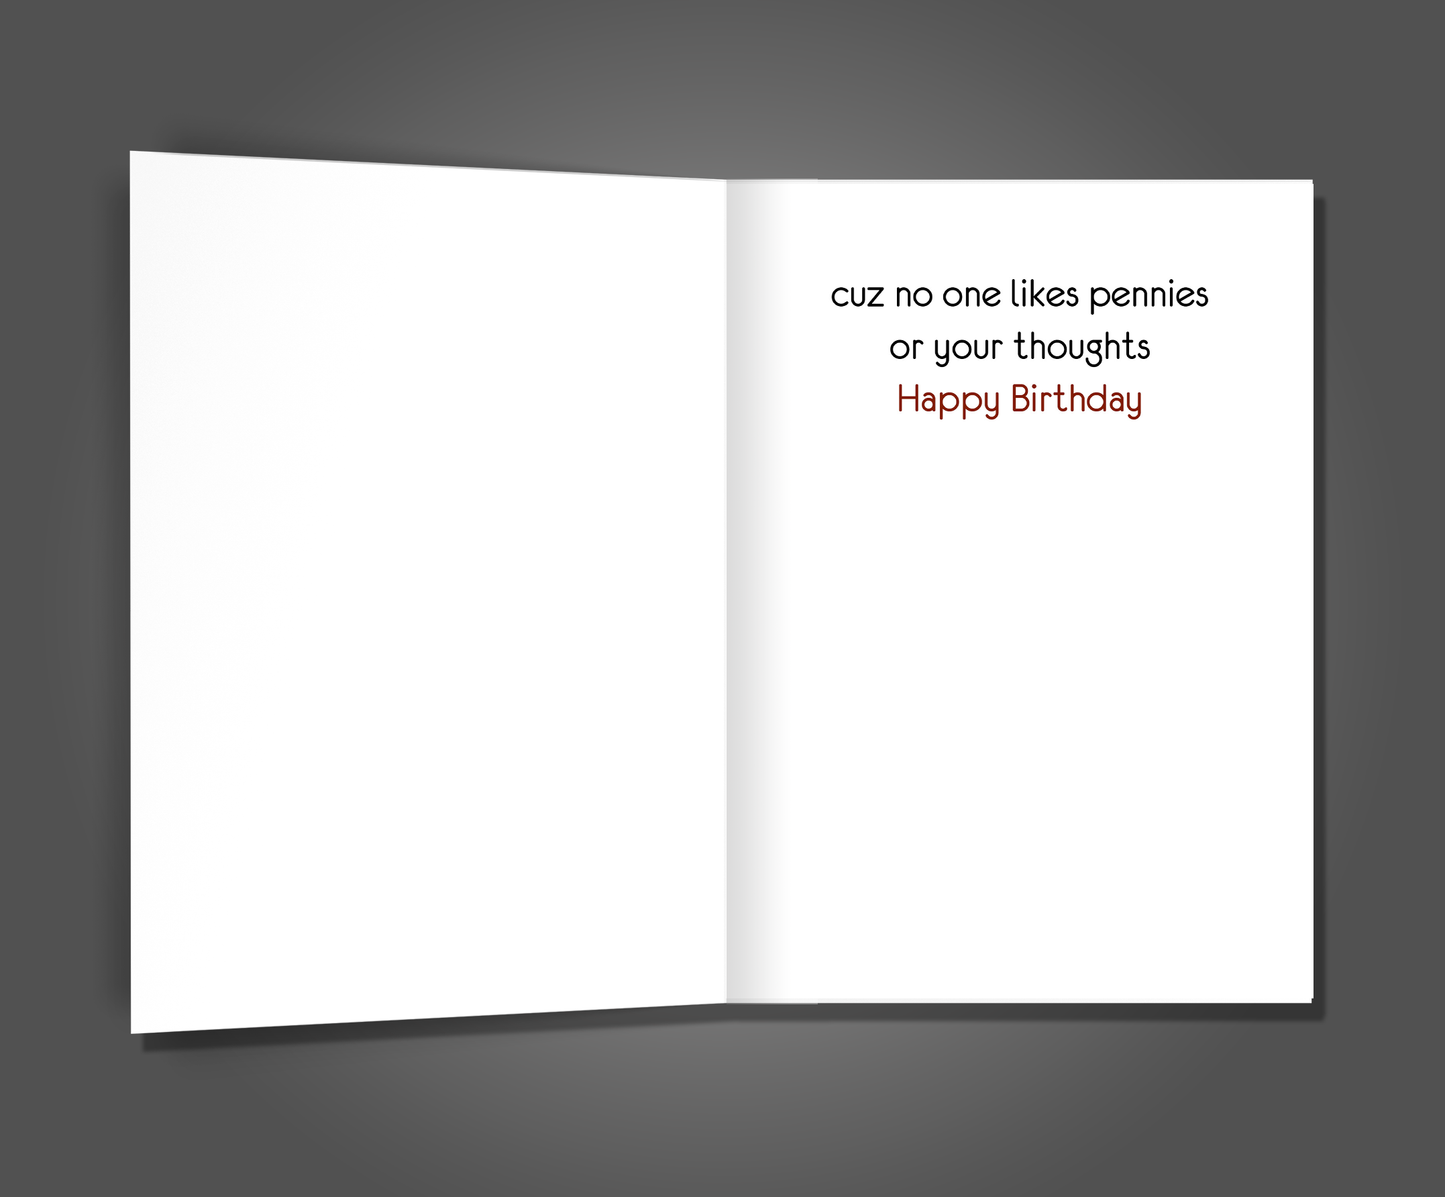 Don't Like You or Pennies, Birthday Card